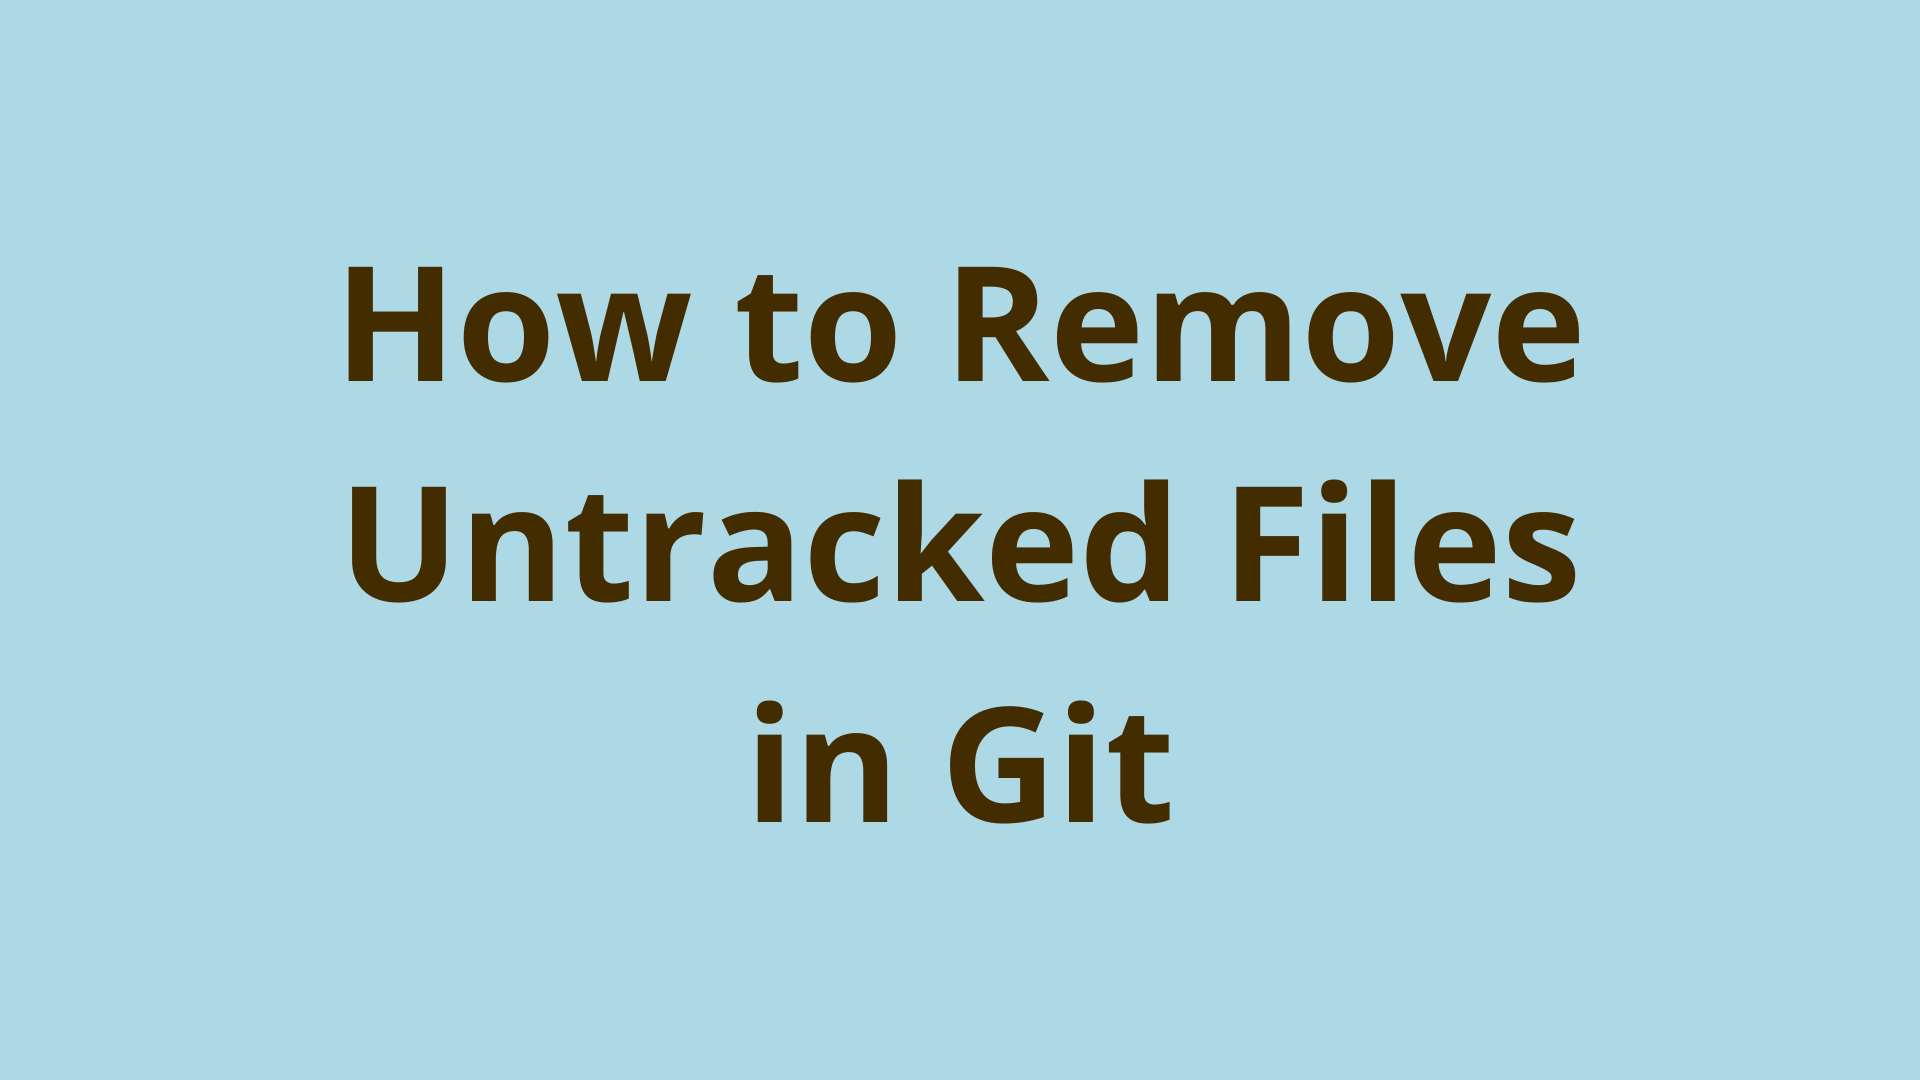 How To Remove Local Untracked Files In Git Working Directory